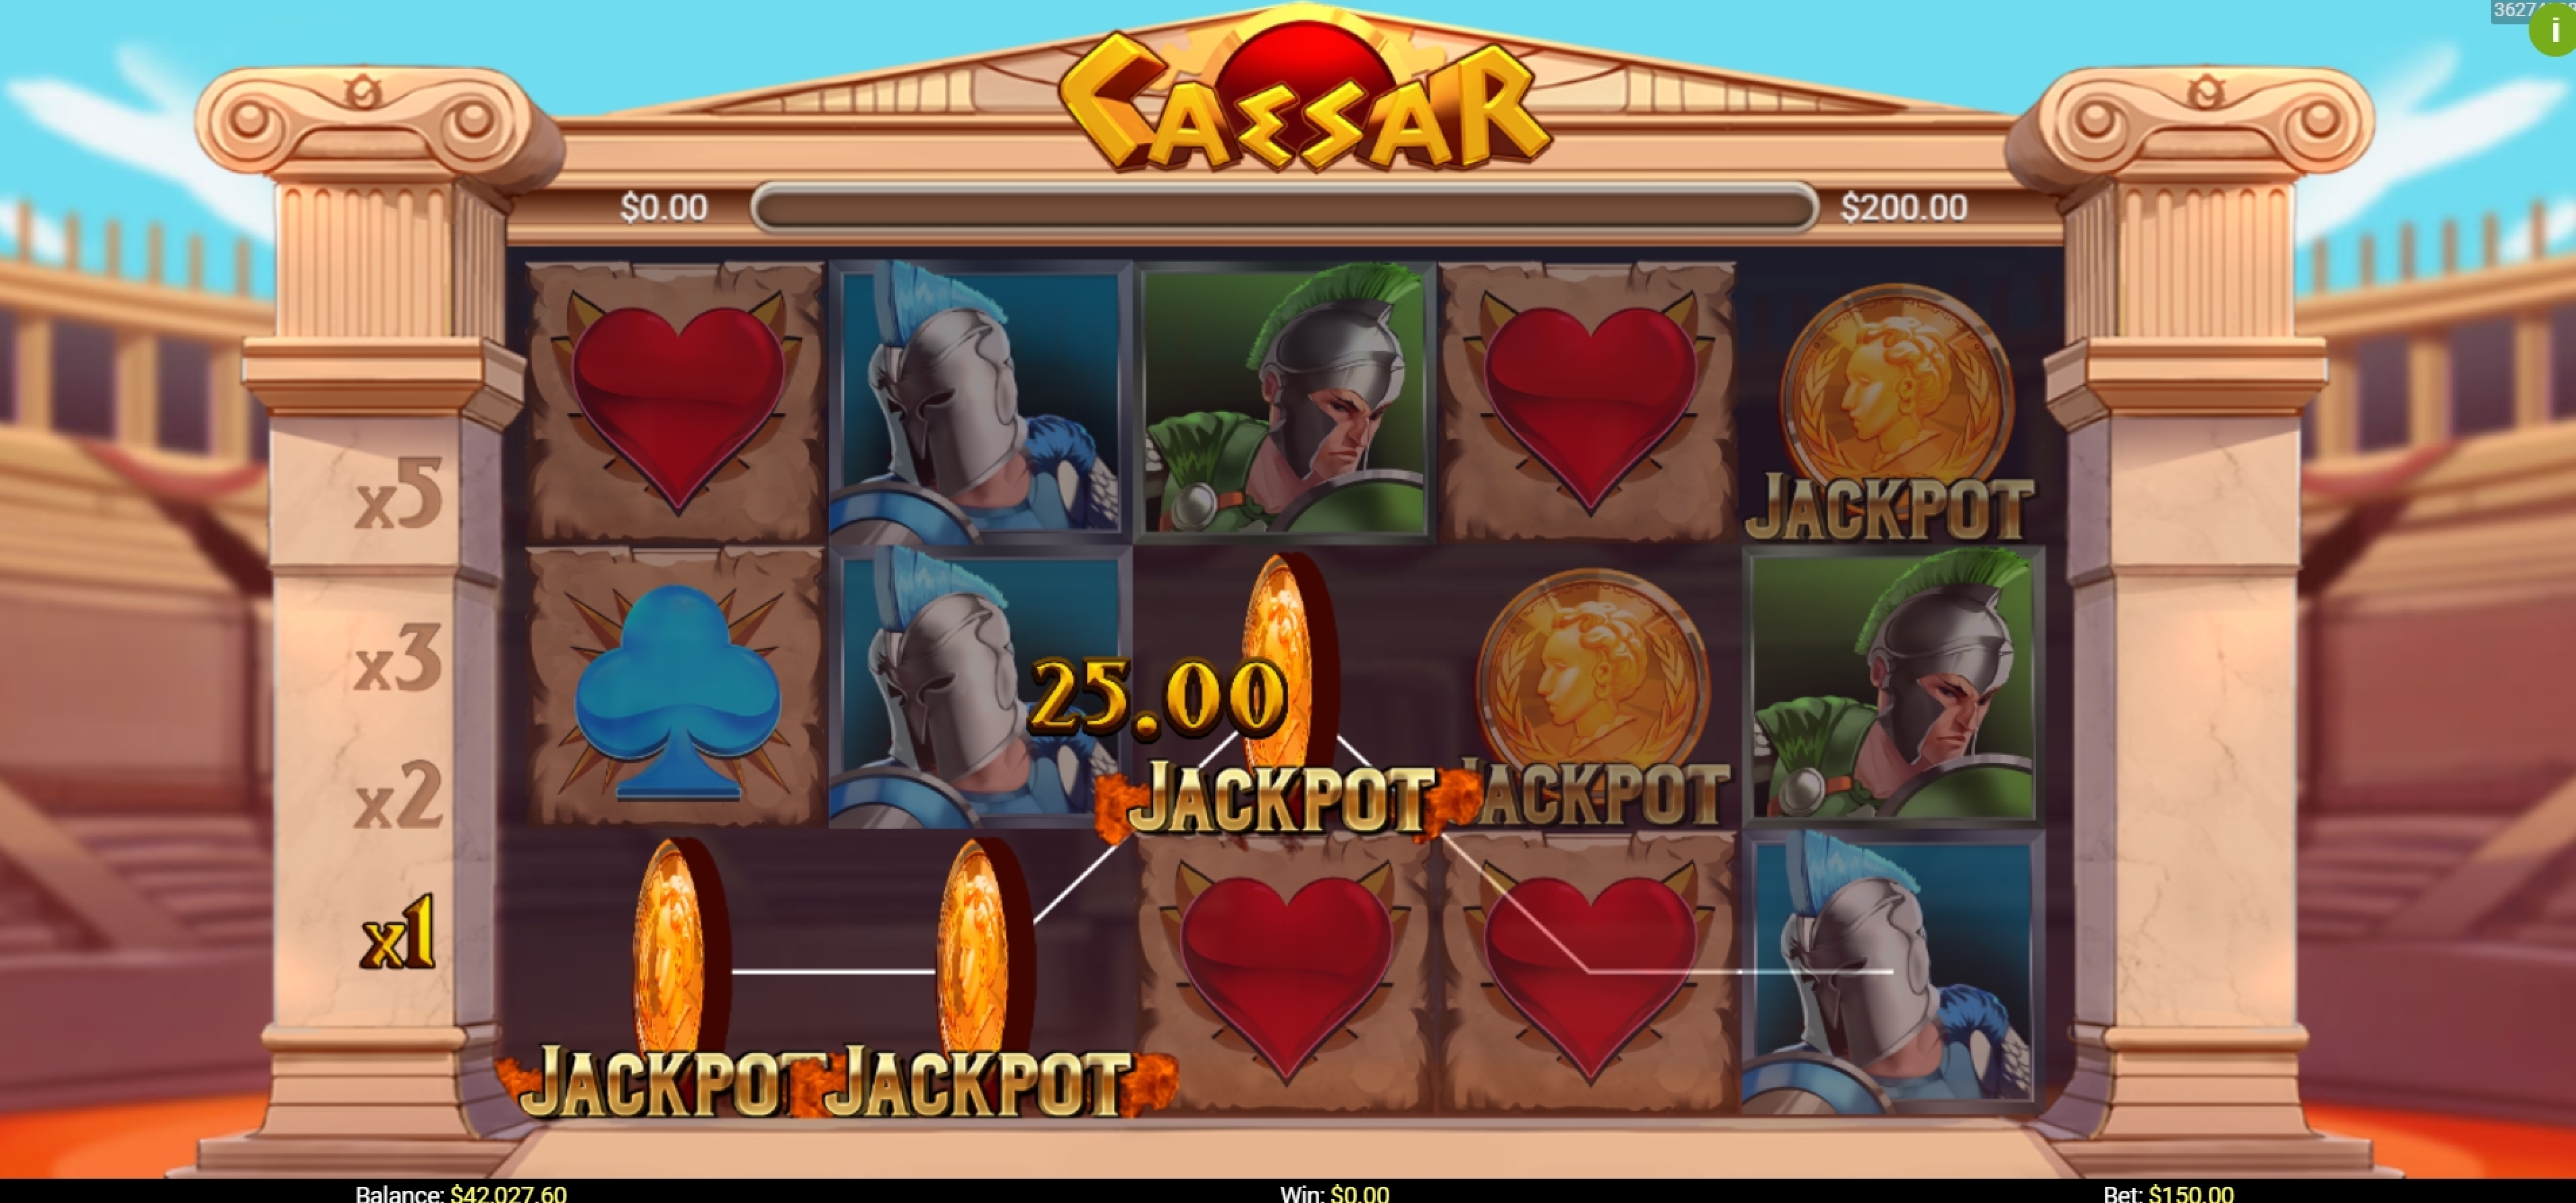 Win Money in Caesar Free Slot Game by Mobilots